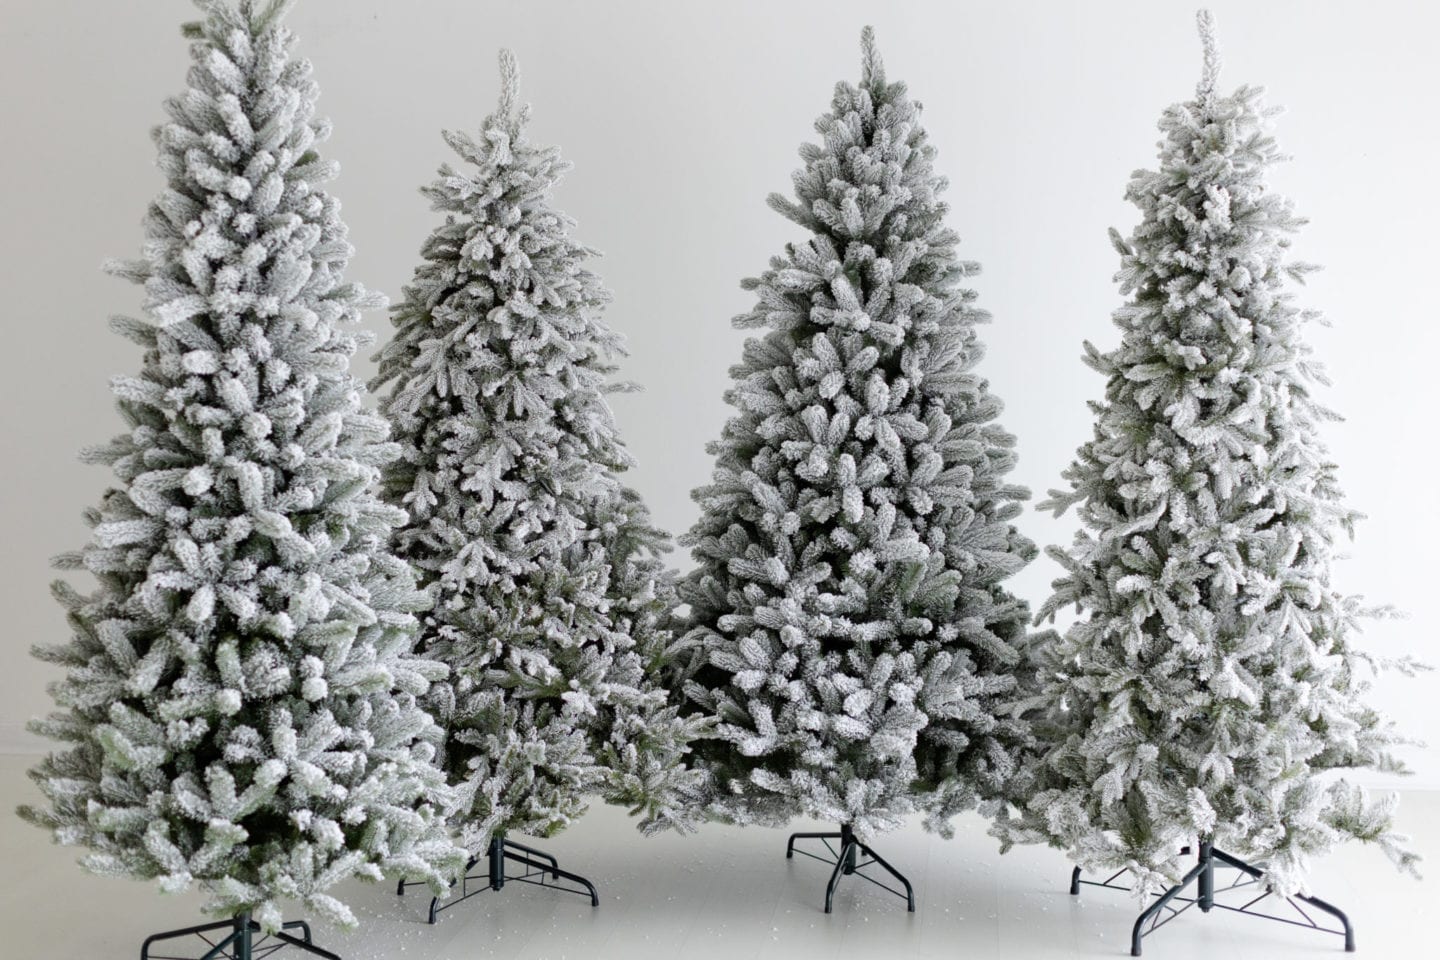 What's the big difference? Want the perfect holiday flocked Christmas tree? I've seen every King of Christmas flocked Christmas tree & can help find your perfect pre flocked tree! Want a simple flocked Christmas tree, an unlit flocked artificial tree, slim, queen flocked tree, or small flocked tree? Let's dive in!